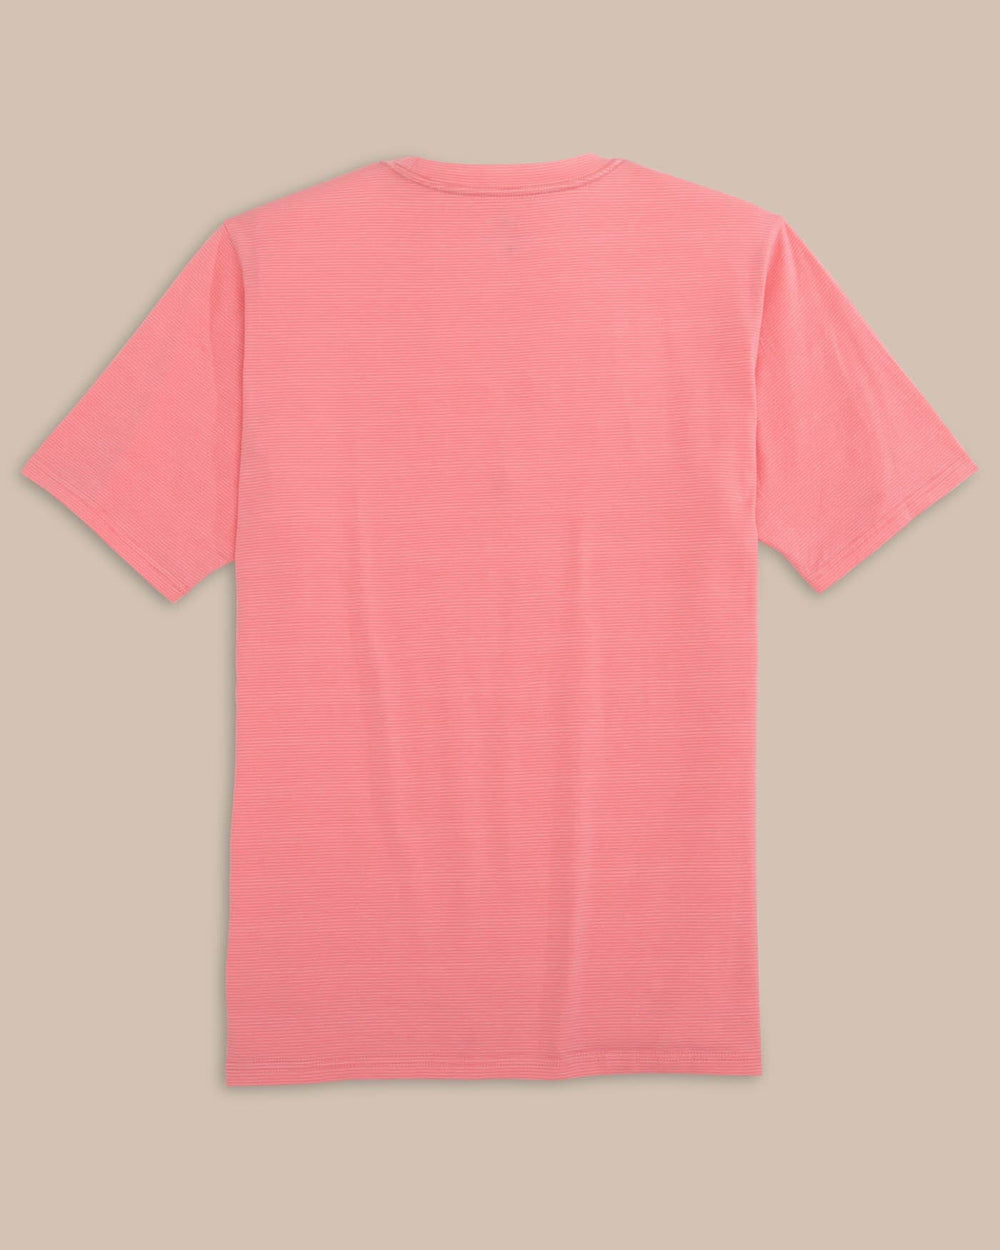 The back view of the Southern Tide The Seaport Davenport Stripe Tee by Southern Tide - Geranium Pink